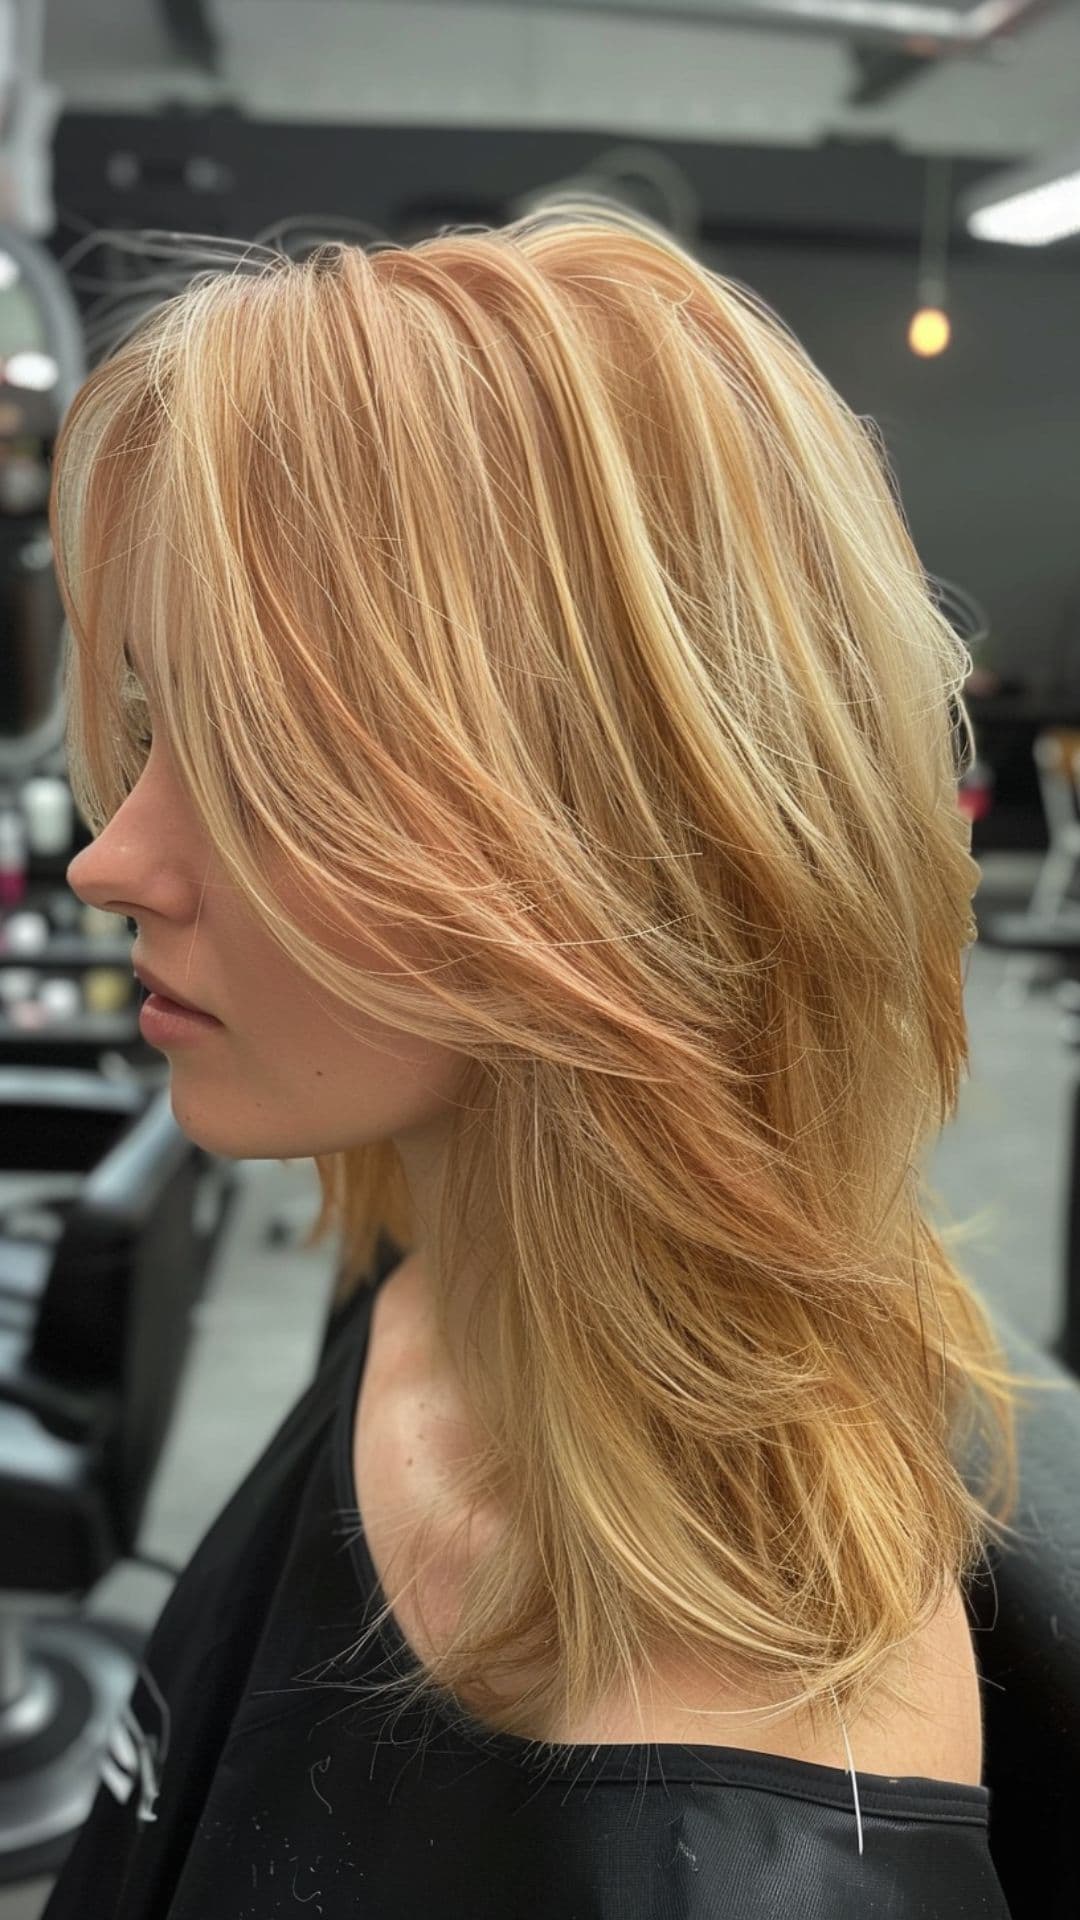 A woman modelling a subtle rose gold highlights.